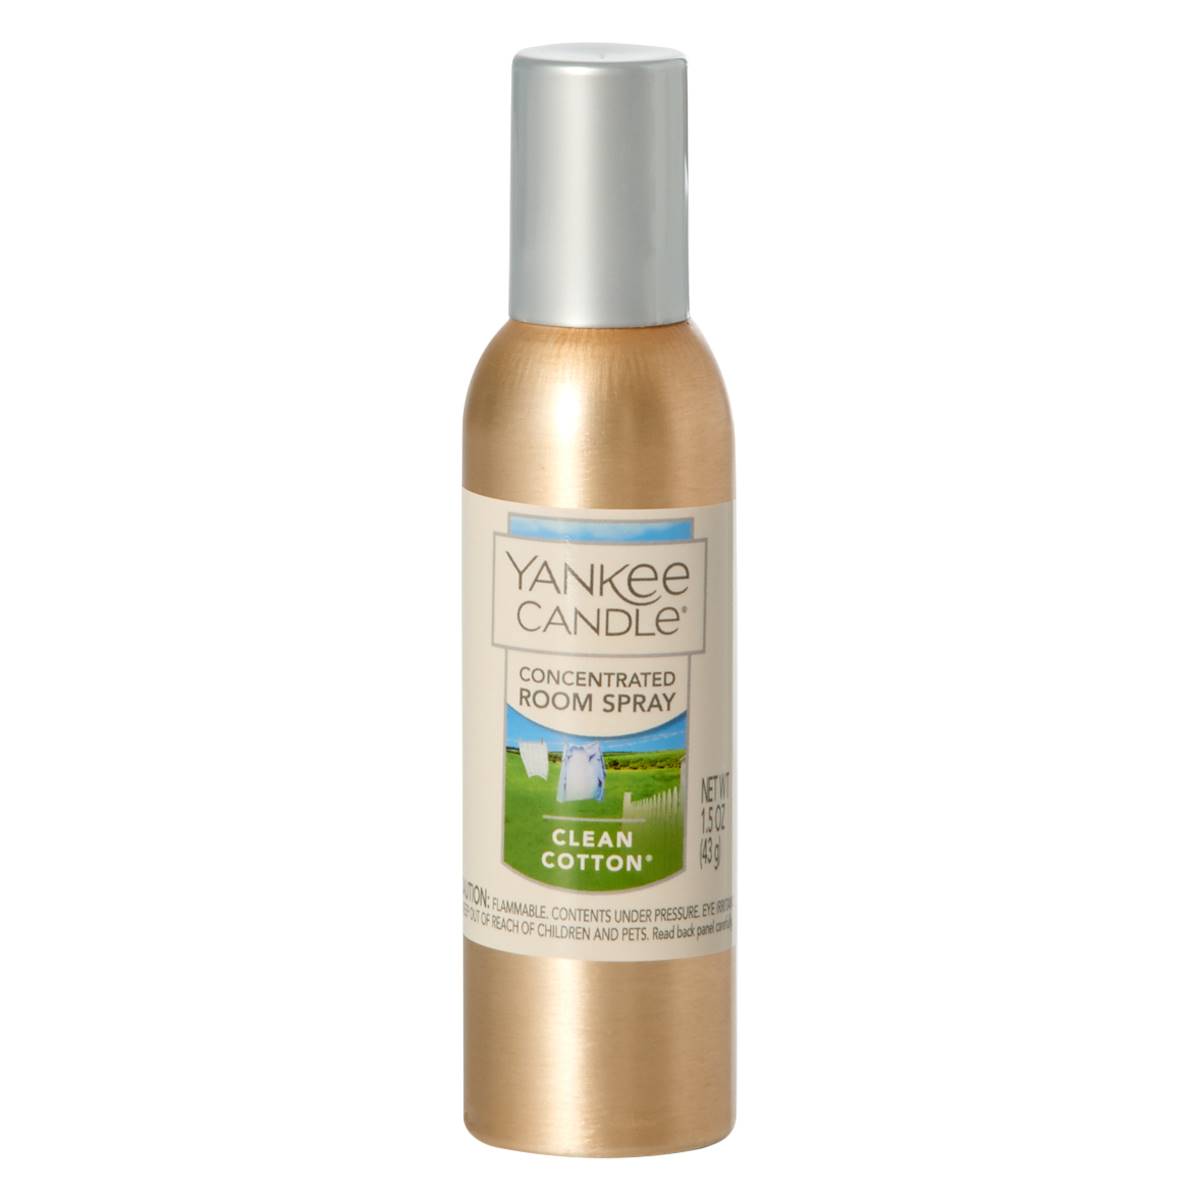 Yankee Candle(R) 1.5oz. Clean Cotton Concentrated Room Spray